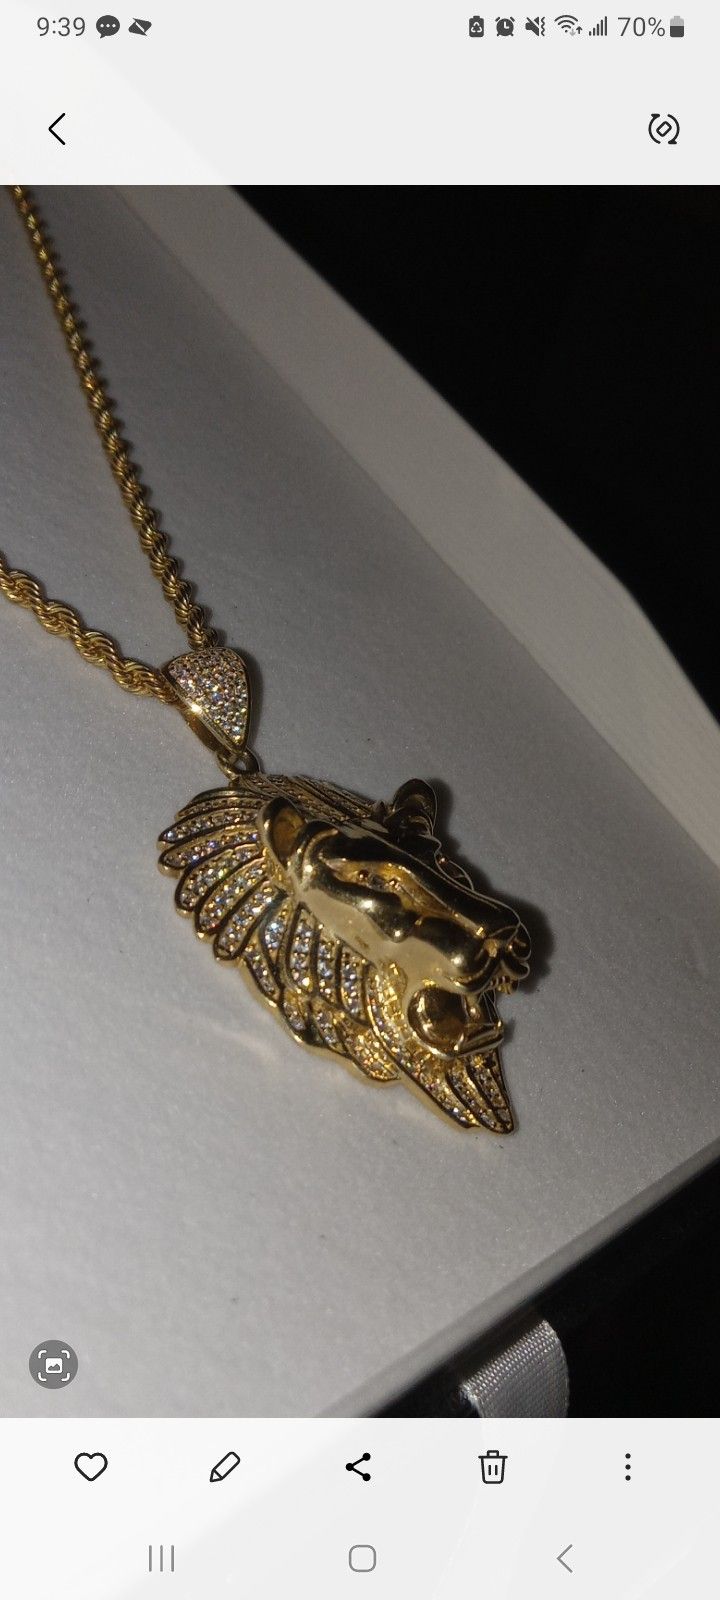 🎯BRAND NEW GOLD NECKLACE 10K 26"INCHS AND LION PENDANT 10K 20 GRAMS  ONLY $1250 DLLS